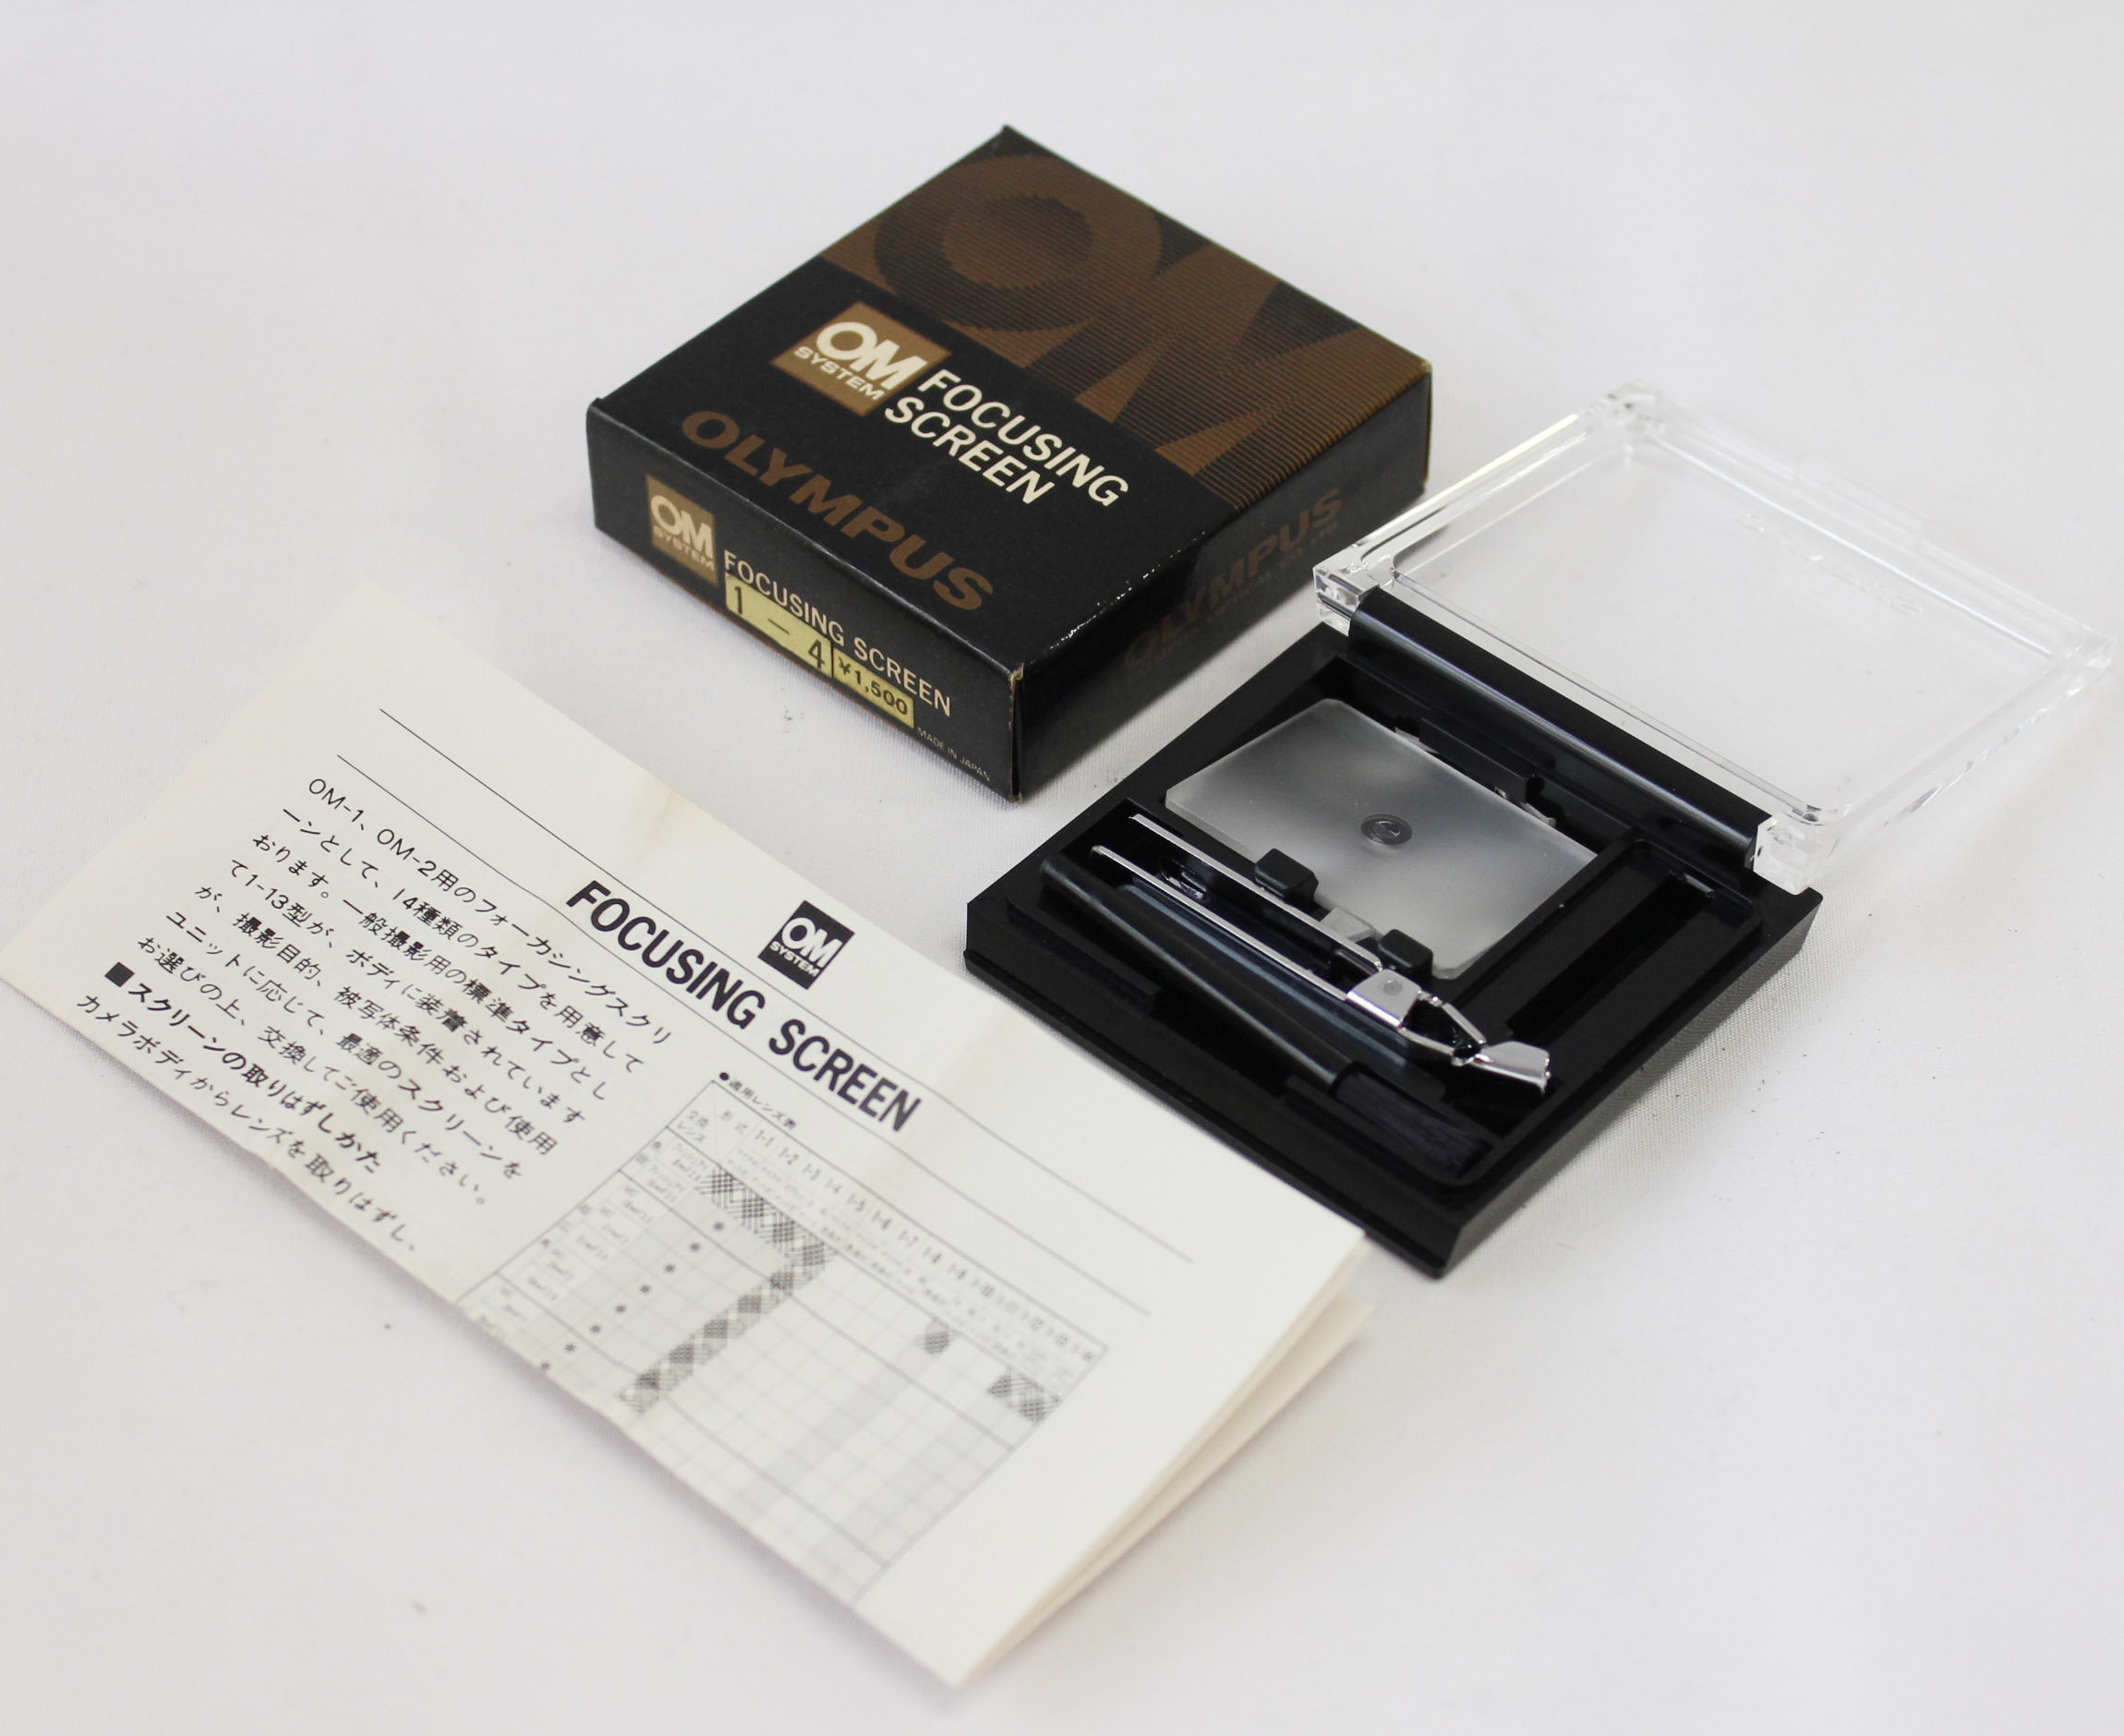 Japan Used Camera Shop | Olympus OM System Focusing Screen Type 1-13 (Microprism / Split Matte) in Box for OM-1, OM-2 from Japan